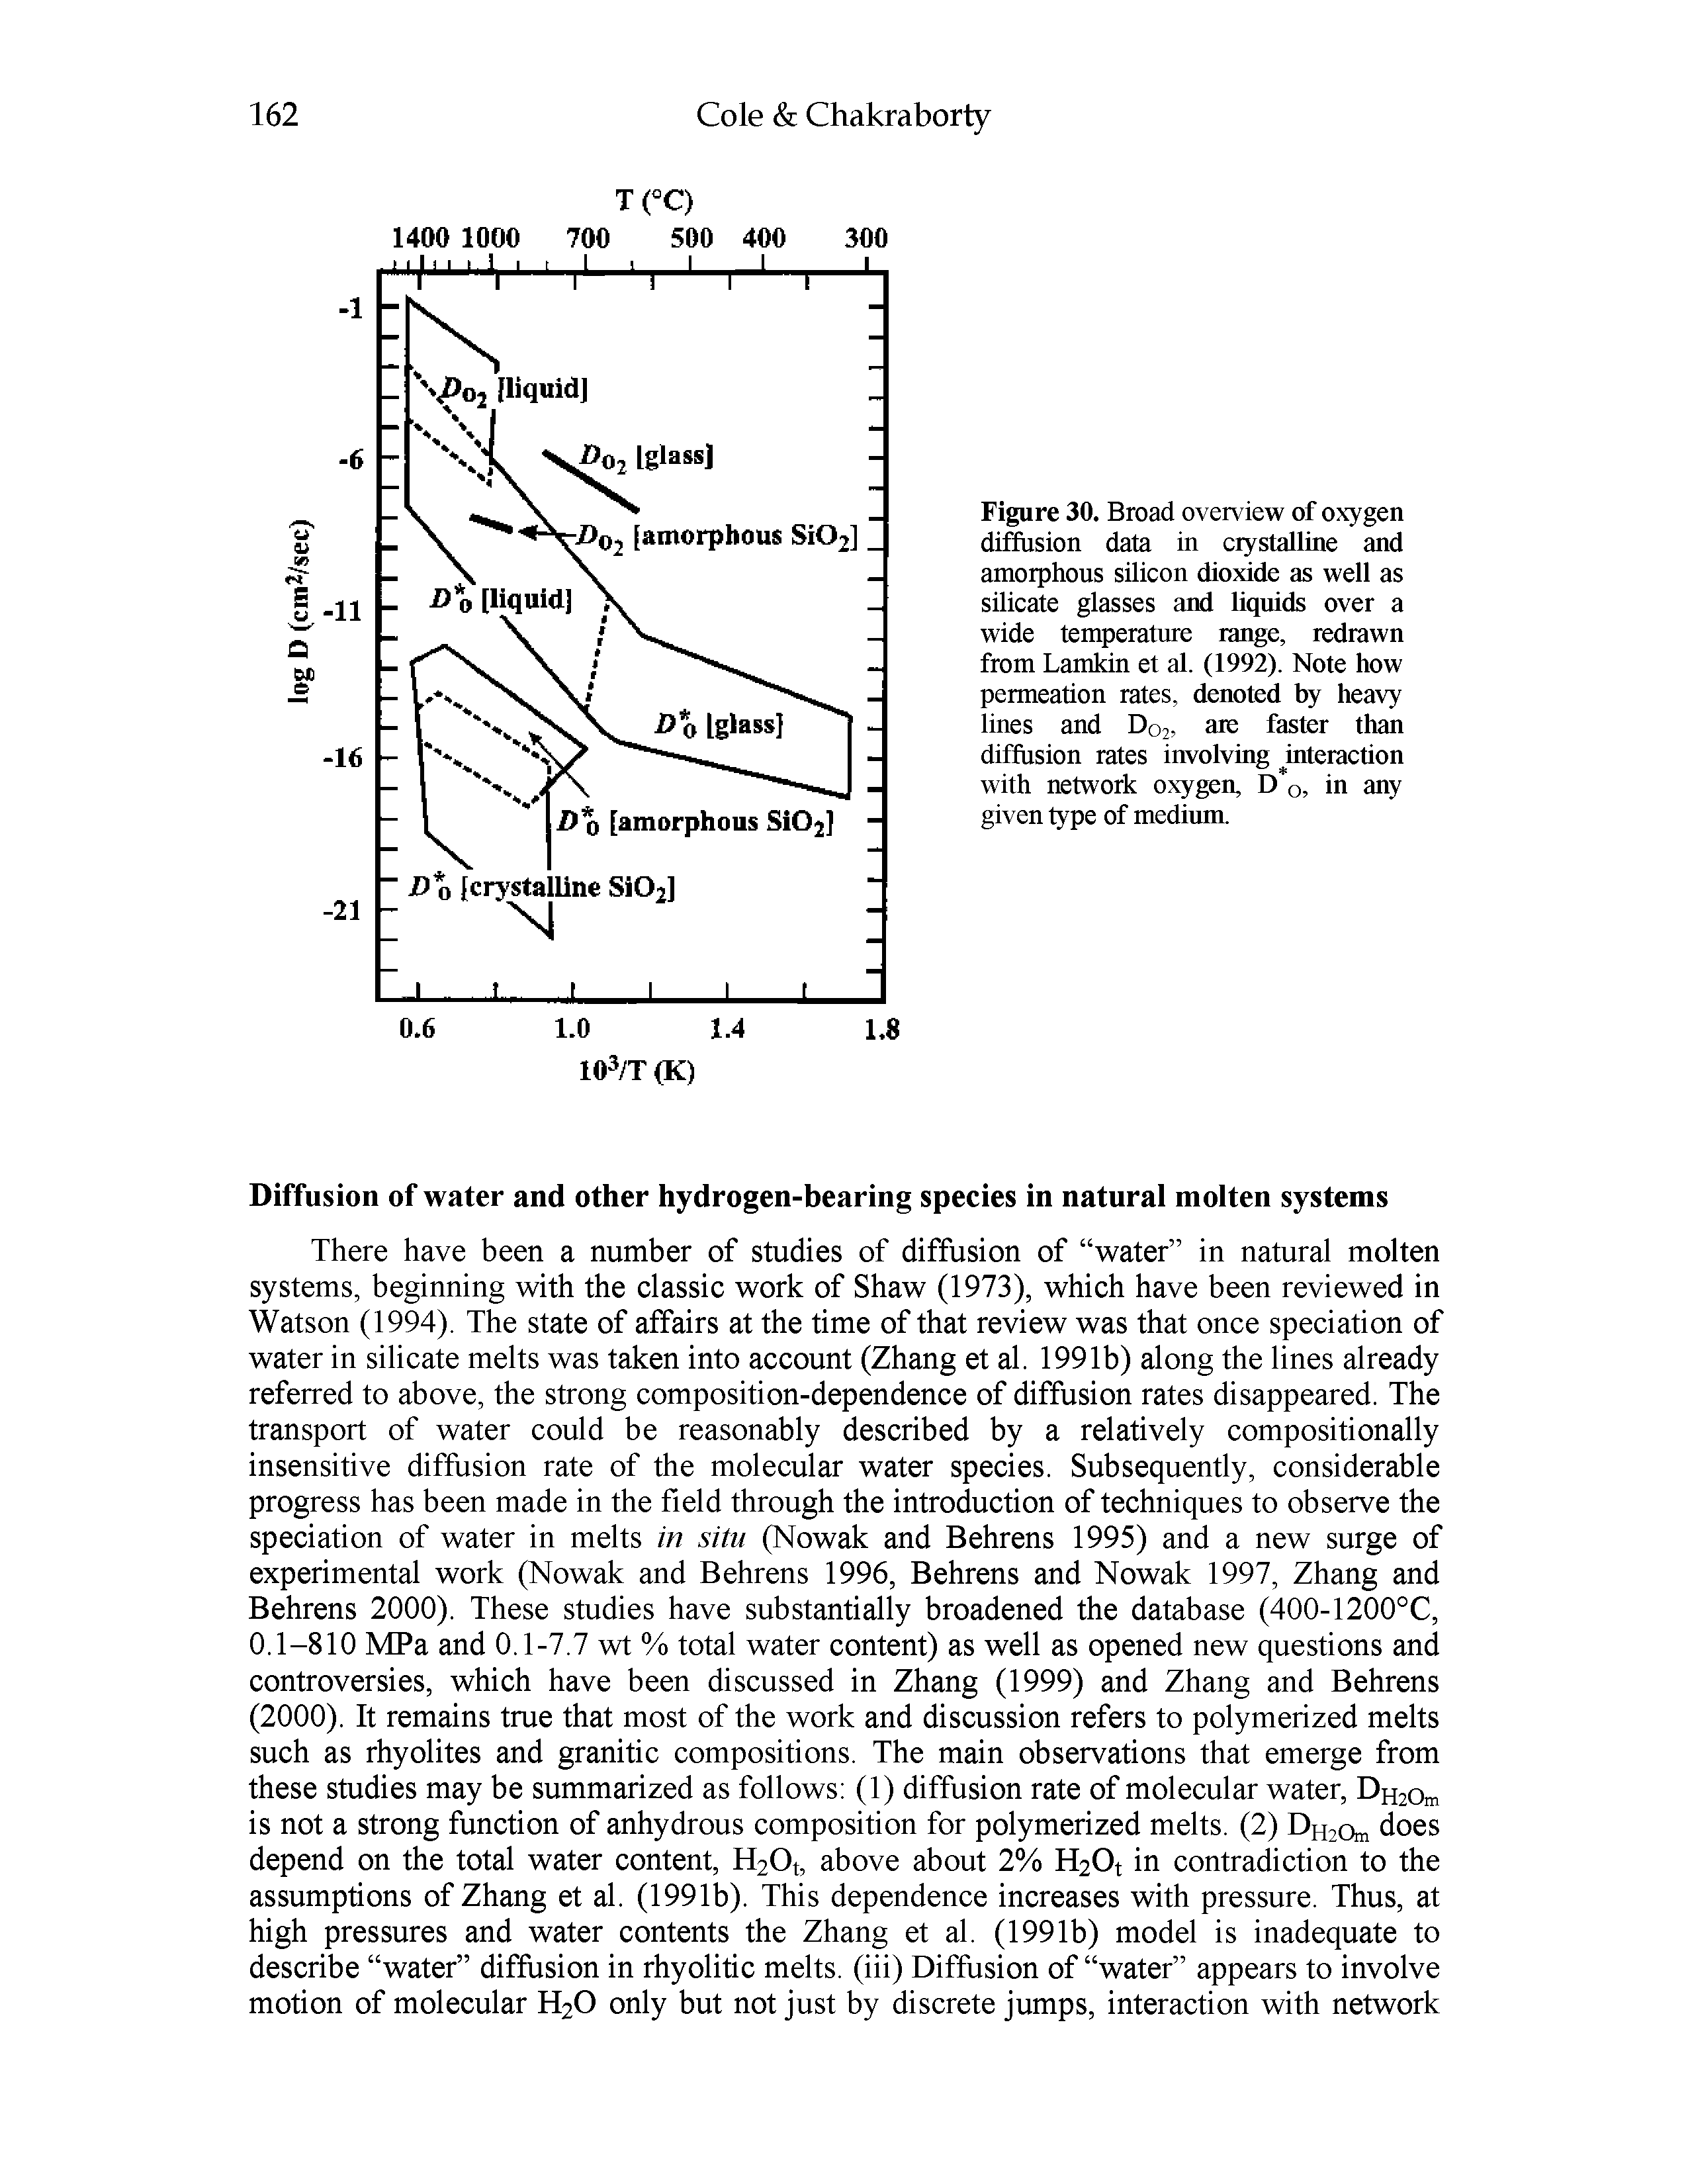 Figure 30. Broad overview of oxygen diffusion data in crystalline and amorphous silicon dioxide as well as silicate glasses and liquids over a wide temperature range, redrawn from Lamkin et al. (1992). Note how permeation rates, denoted by heavy lines and D02, ate faster than diffusion rates involving interaction with network oxygen, D o, in any given type of medium.